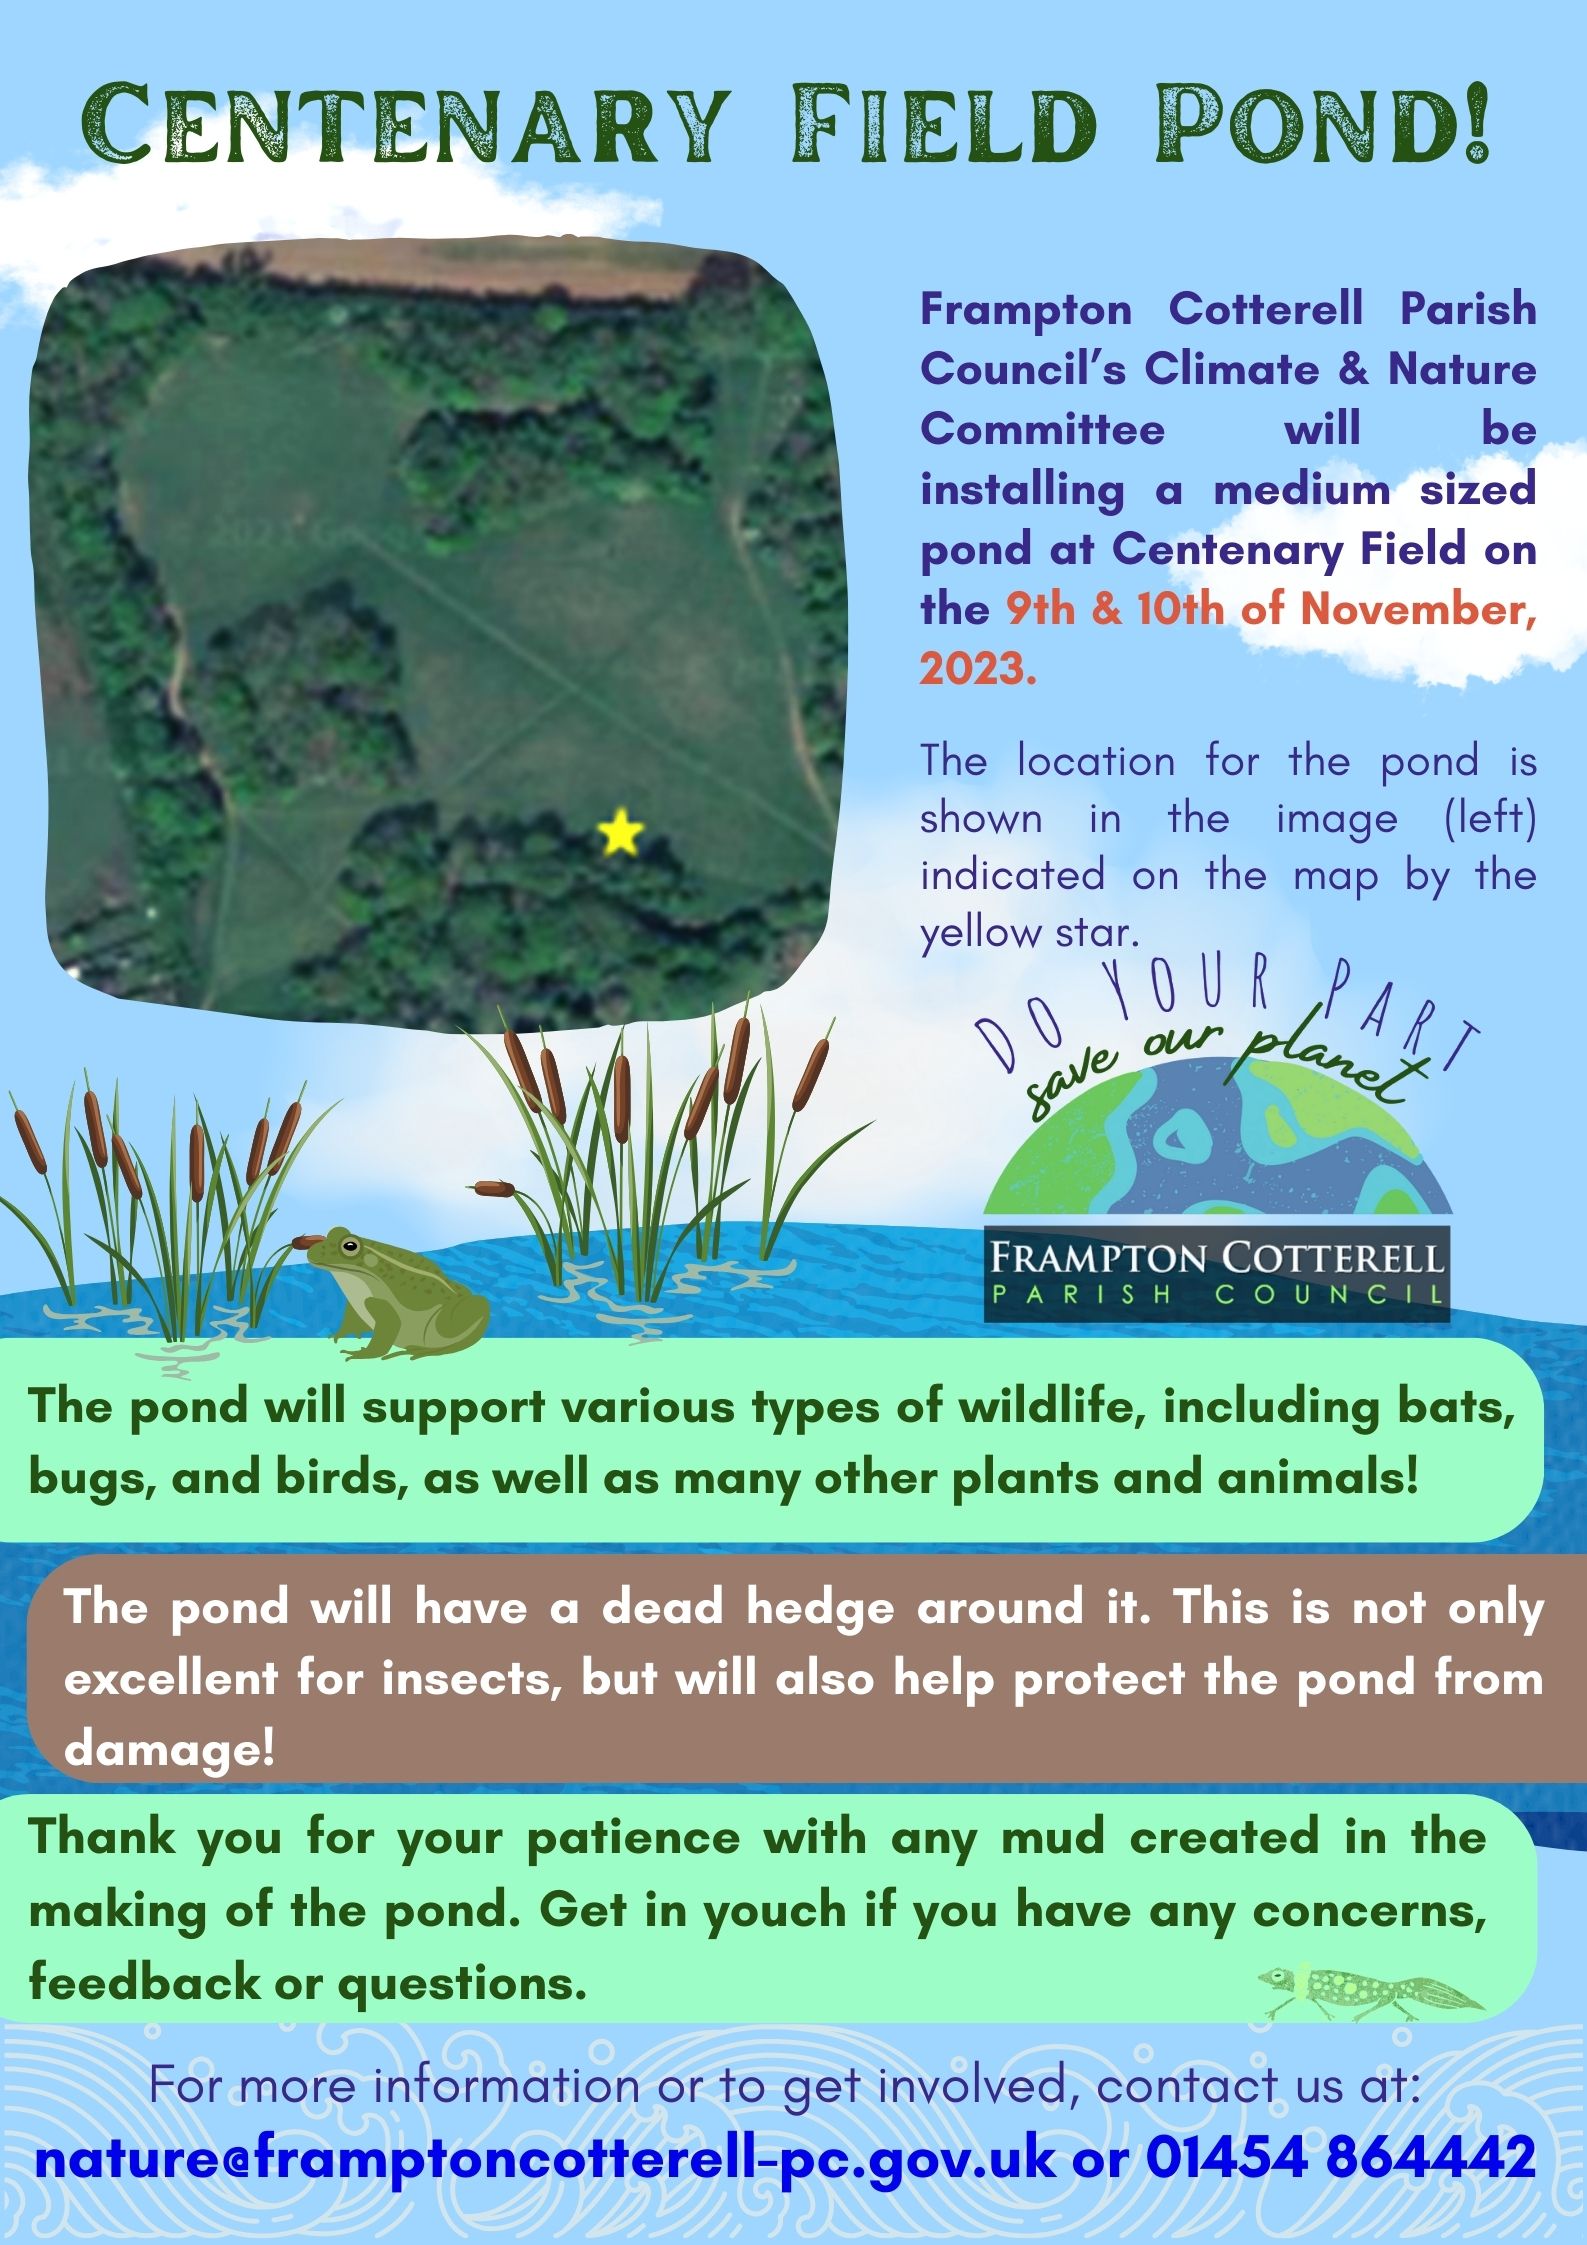 A poster titled "Centenary Field Pond". Upper left is An aerial map of Centenary Field, marked with a star labelled "site for the new pond!" Poster text reads, Frampton Cotterell Parish Council’s Climate & Nature Committee will be installing a medium sized pond at Centenary Field on the 9th & 10th of November, 2023.  The location for the pond is shown in the image (left) indicated on the map by the yellow star. The pond will support various types of wildlife, including bats, bugs, and birds, as well as many other plants and animals! The pond will have a dead hedge around it. This is not only excellent for insects, but will also help protect the pond from damage! Thank you for your patience with any mud created in the making of the pond. Get in youch if you have any concerns, feedback or questions. For more information or to get involved, contact us at:
nature@framptoncotterell-pc.gov.uk or 01454 864442